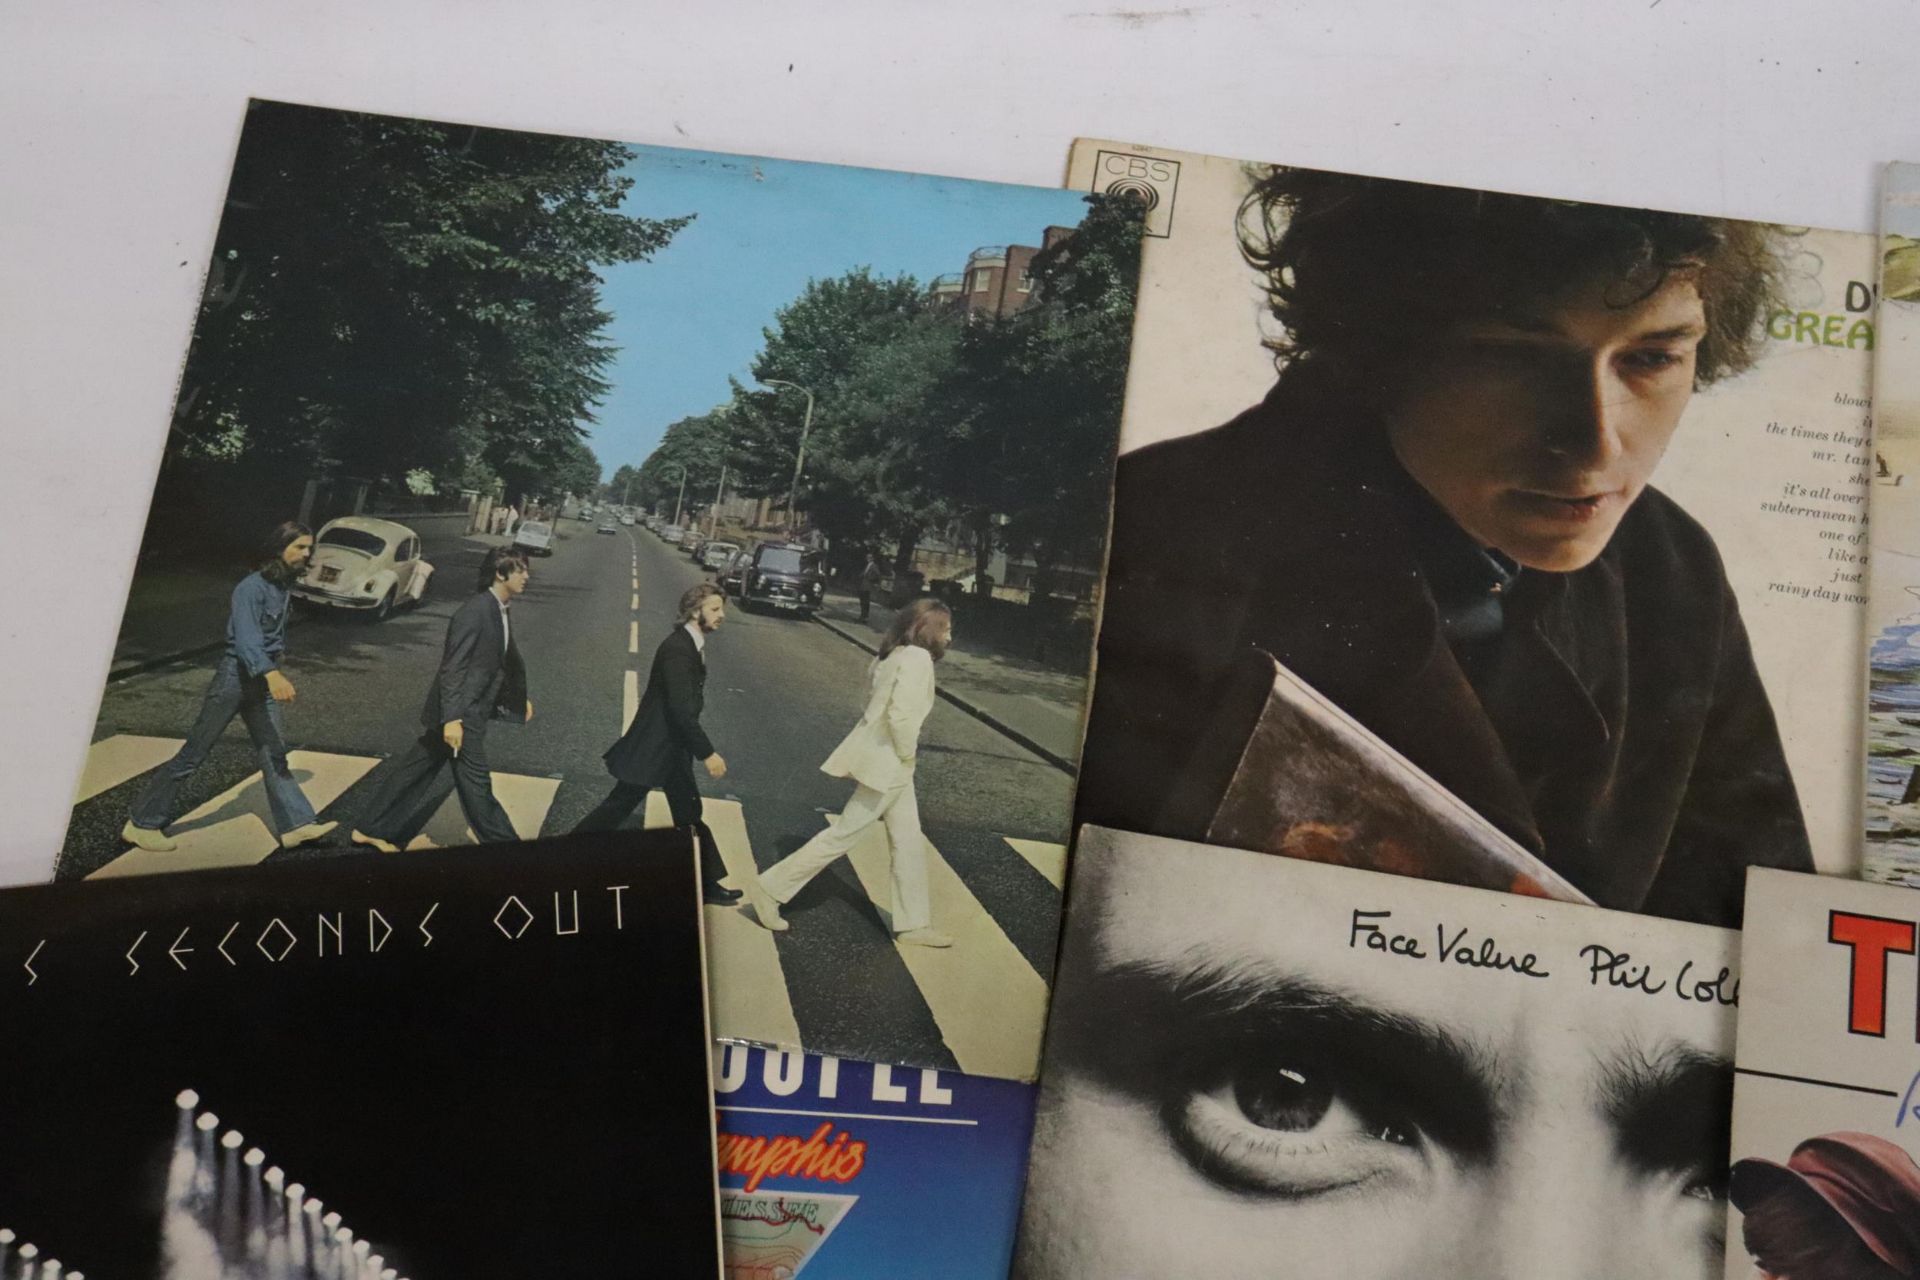 A COLLECTION OF VINYL LP RECORDS TO INCLUDE GENESIS, FOXTROT, THE BEATLES, ABBEY ROAD, BOB DYLAN, - Image 3 of 5